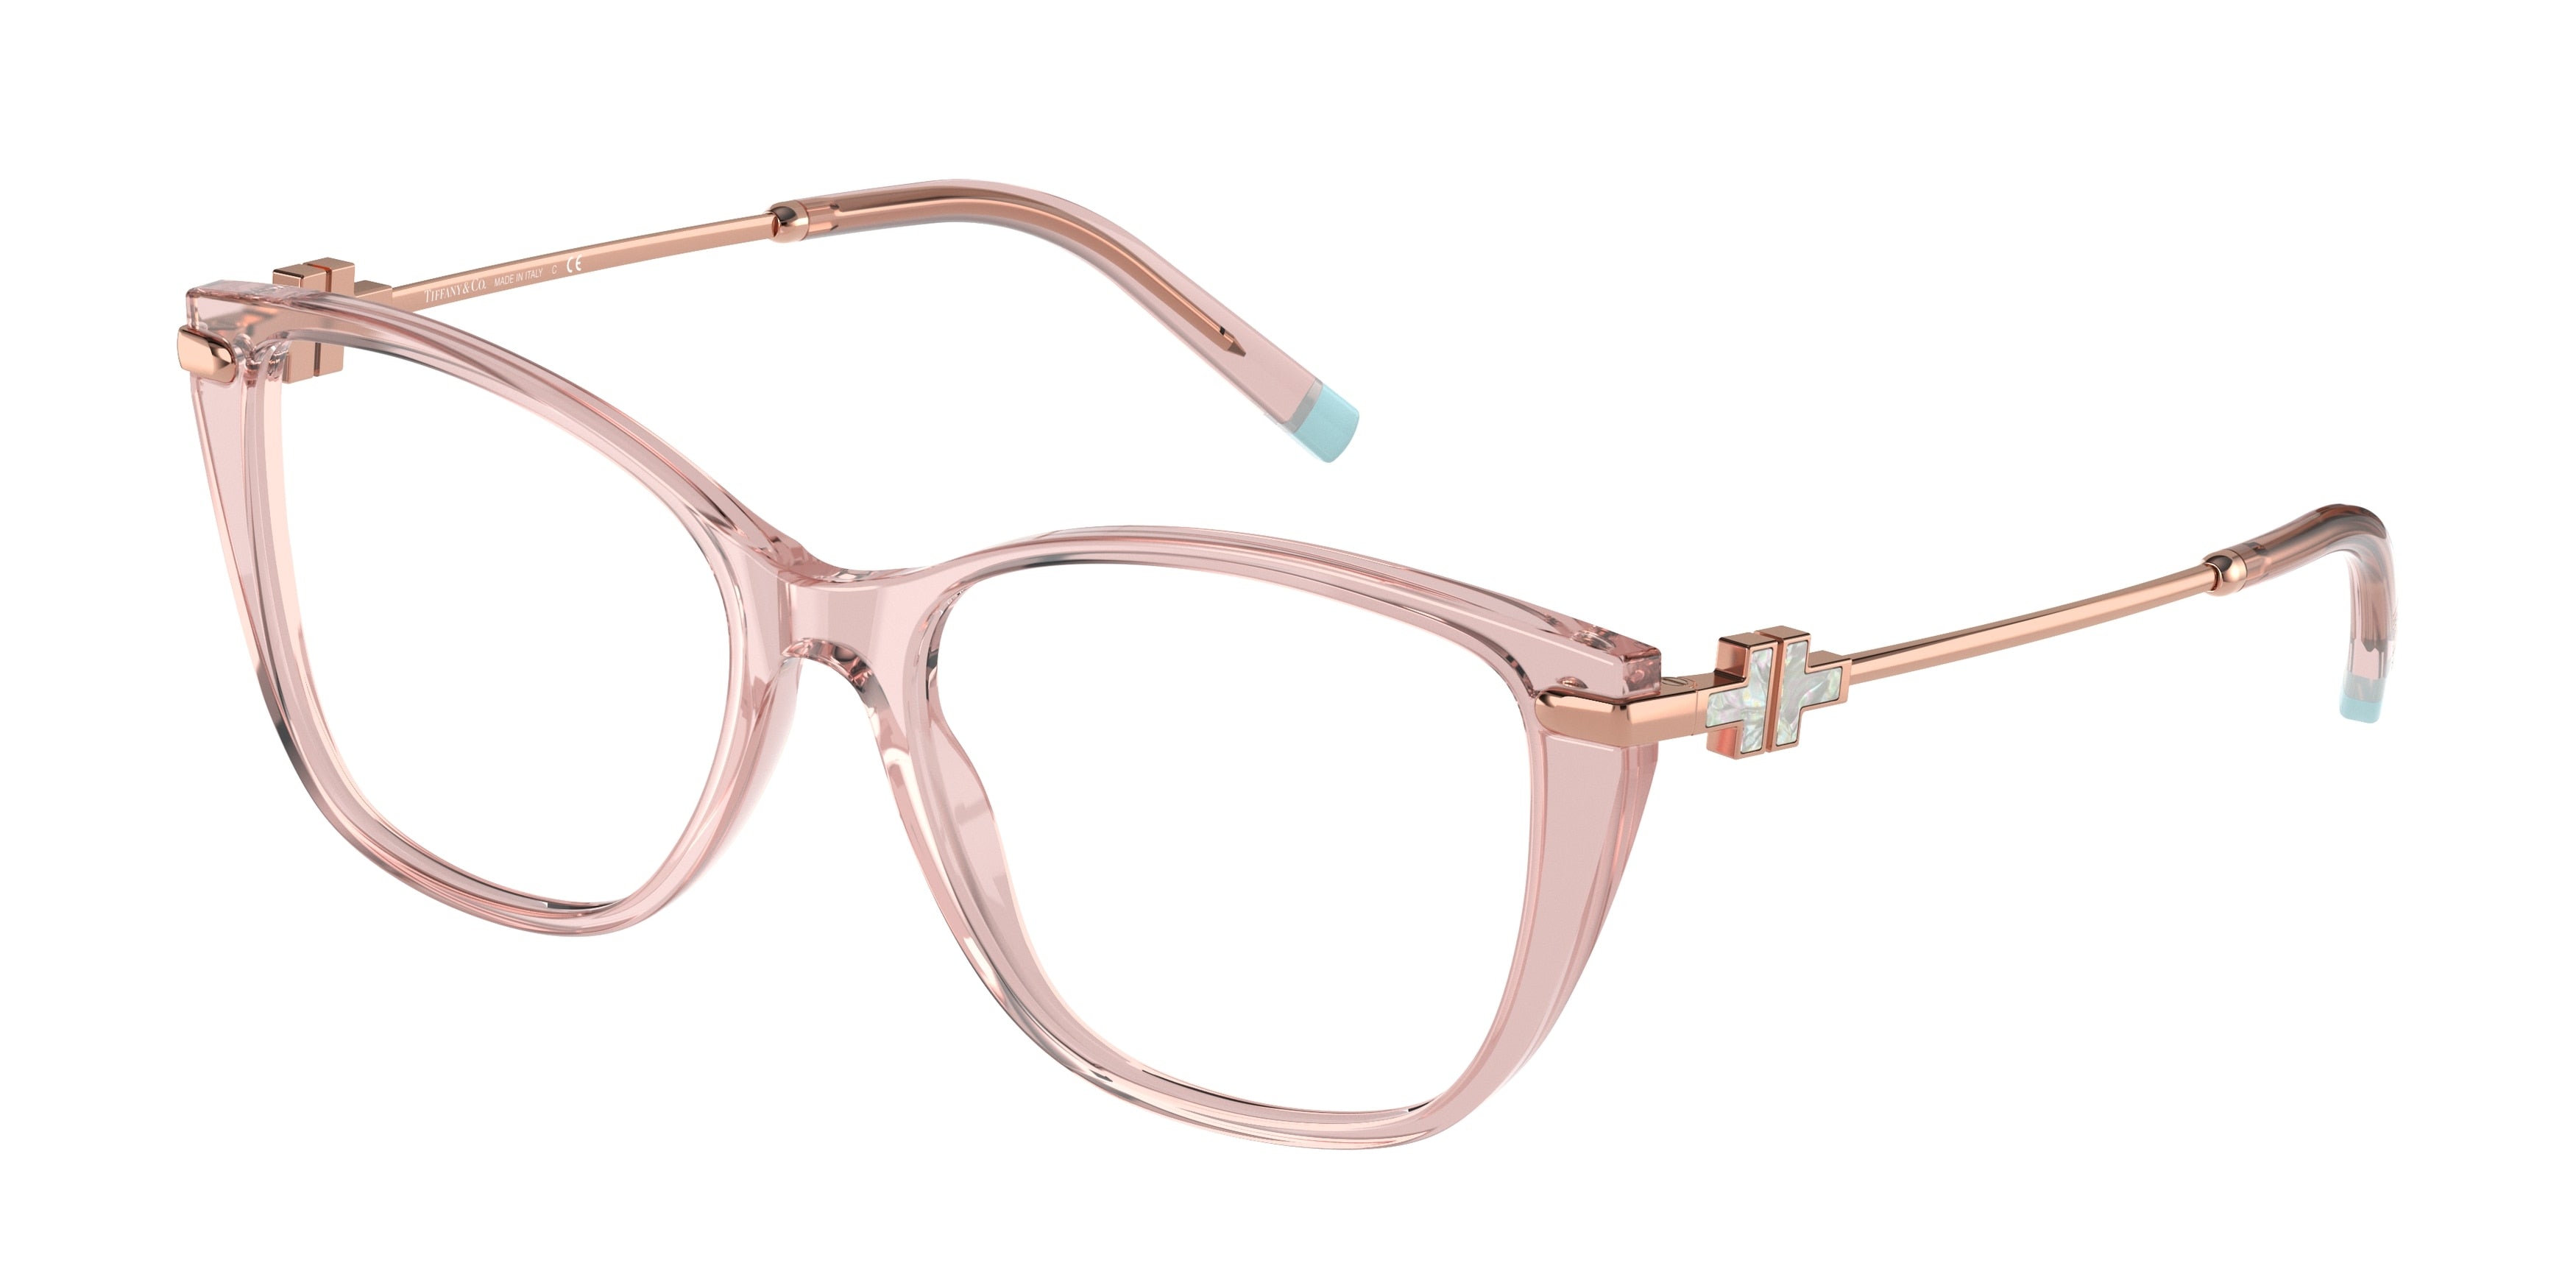 Tiffany TF2216 Butterfly Eyeglasses  8332-Peach Transparent 52-140-16 - Color Map Orange